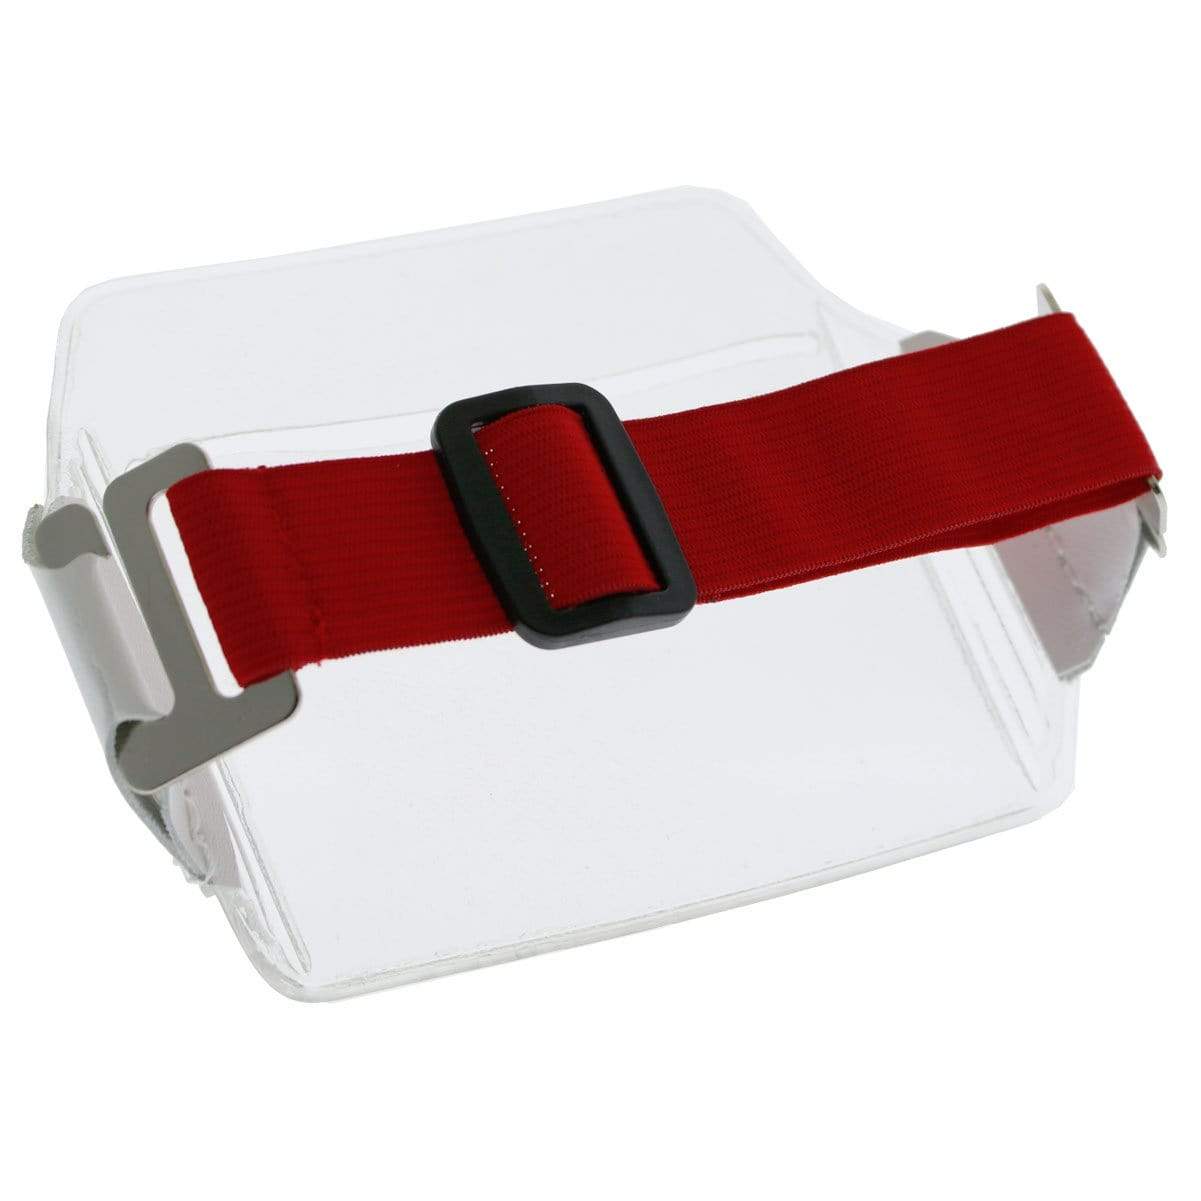 A red strap with a rectangular black buckle is attached to a Clear Over Size Vinyl Horizontal Arm Band Badge Holder (P/N 1840-7100) with metal hooks on each end.